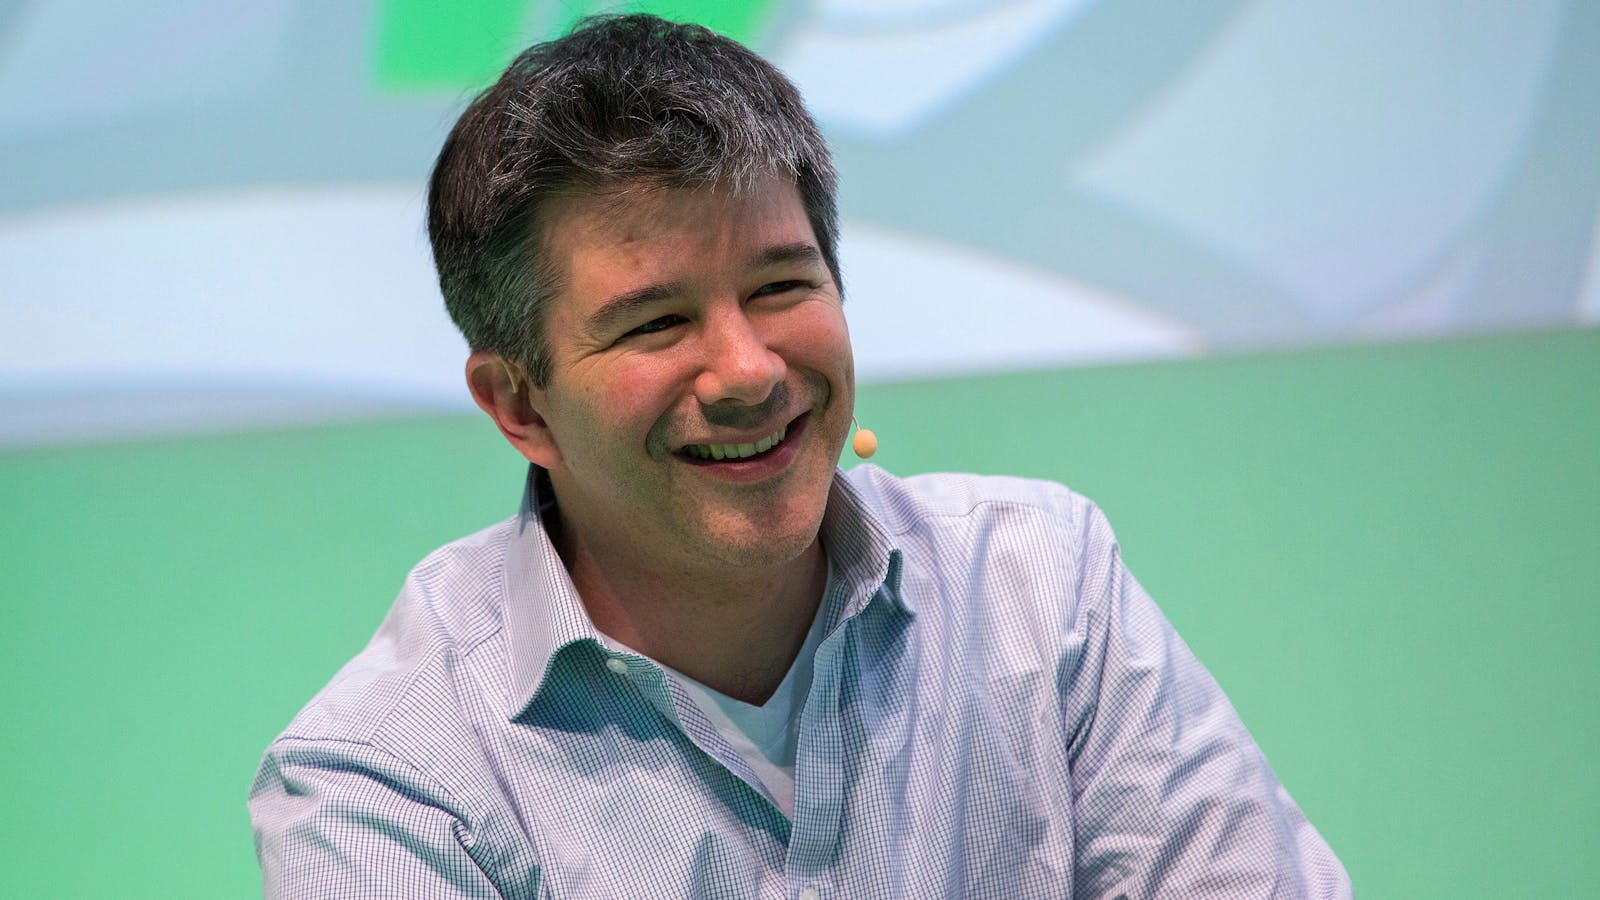 Uber CEO Travis Kalanick. Photo by Bloomberg.